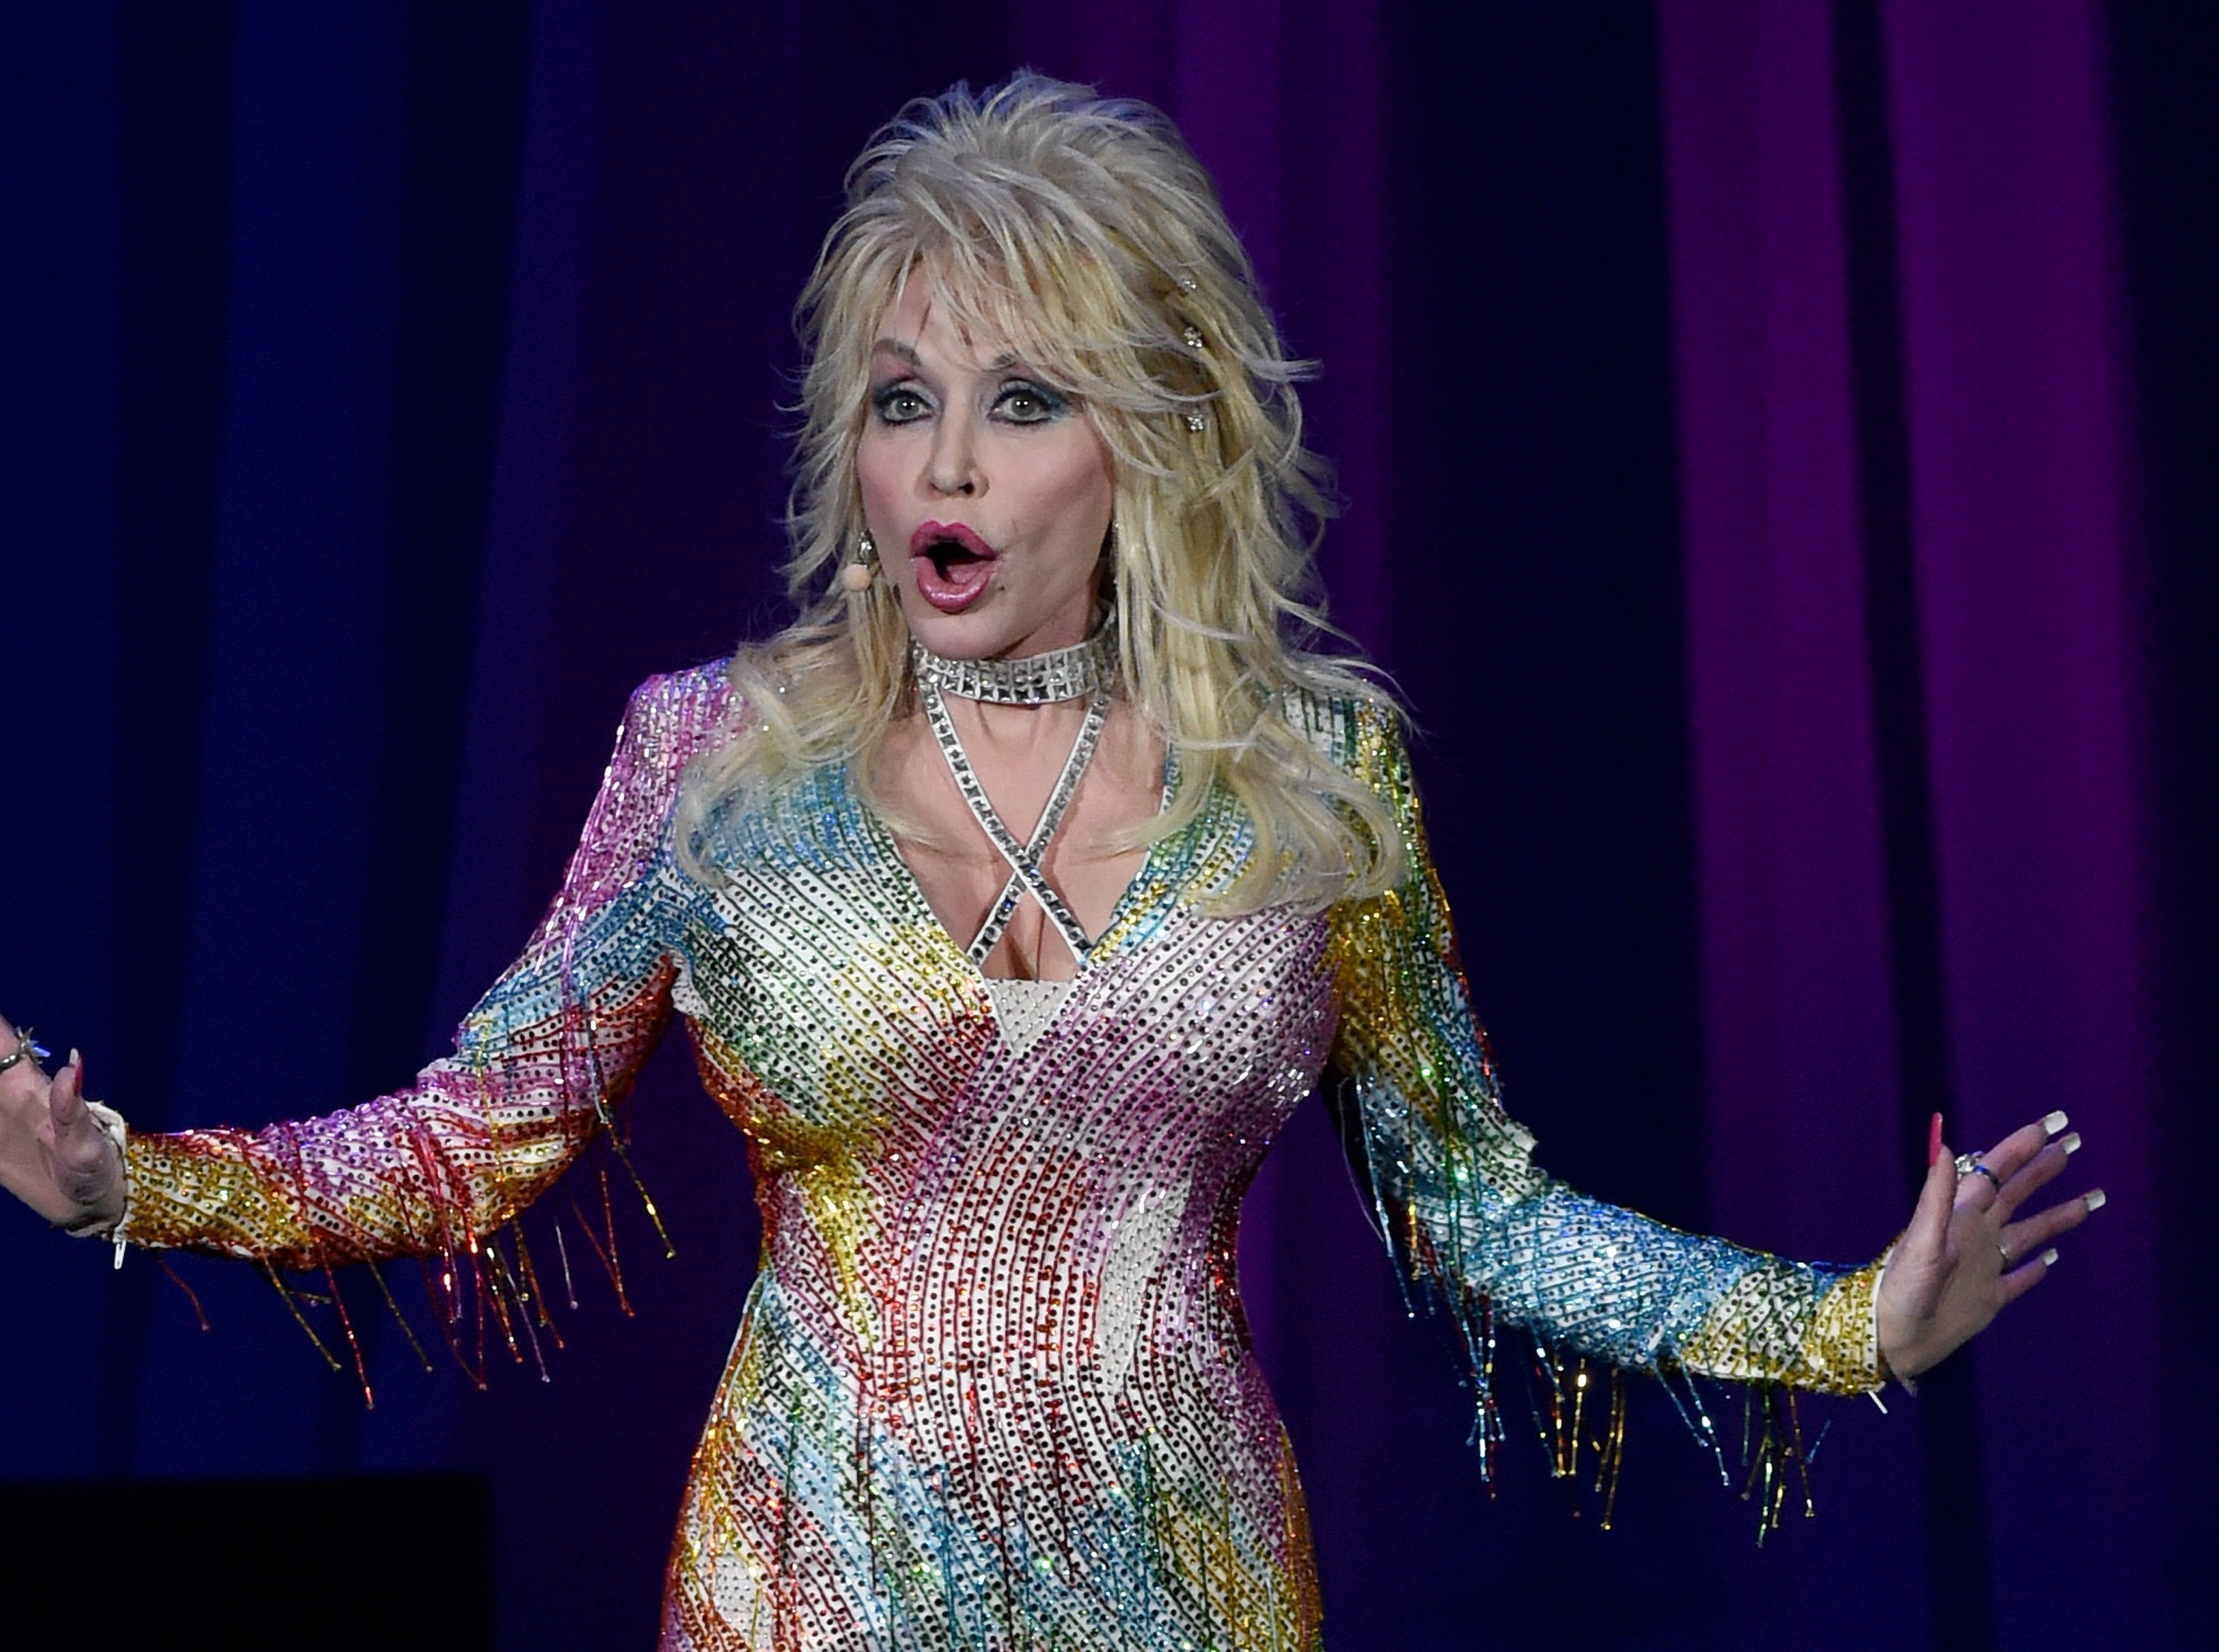 Dolly Parton at Pure & Simple Benefiting the Opry Trust Fund in Nashville, Tennessee on August 1, 2015 | Photo: Getty Images